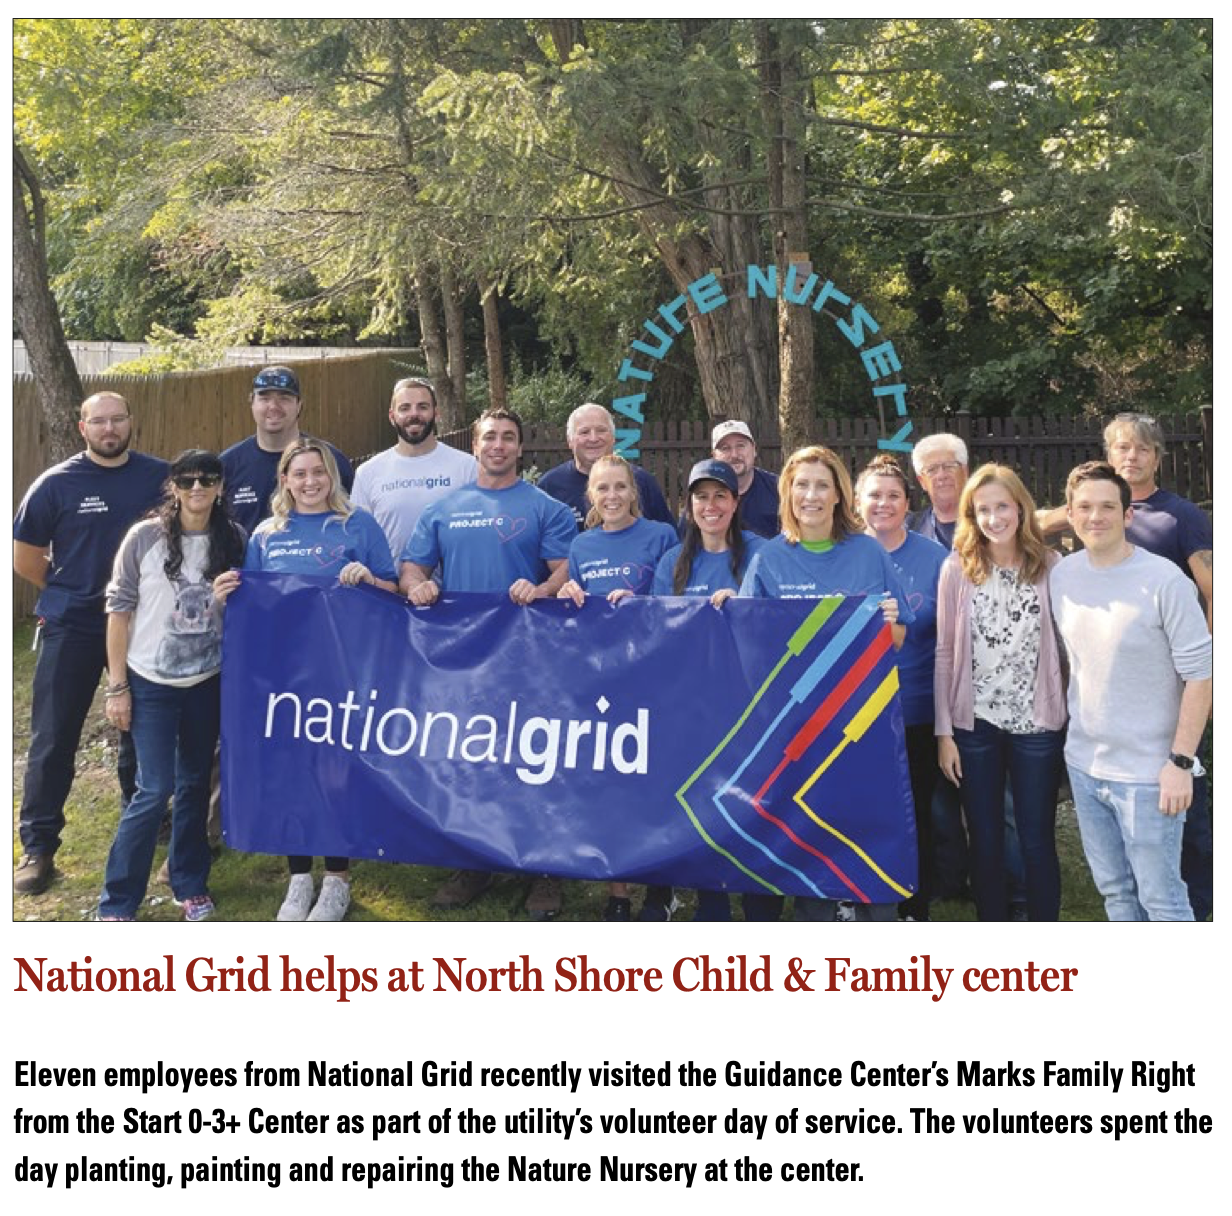 National Grid helps at North Shore Child & Family Center